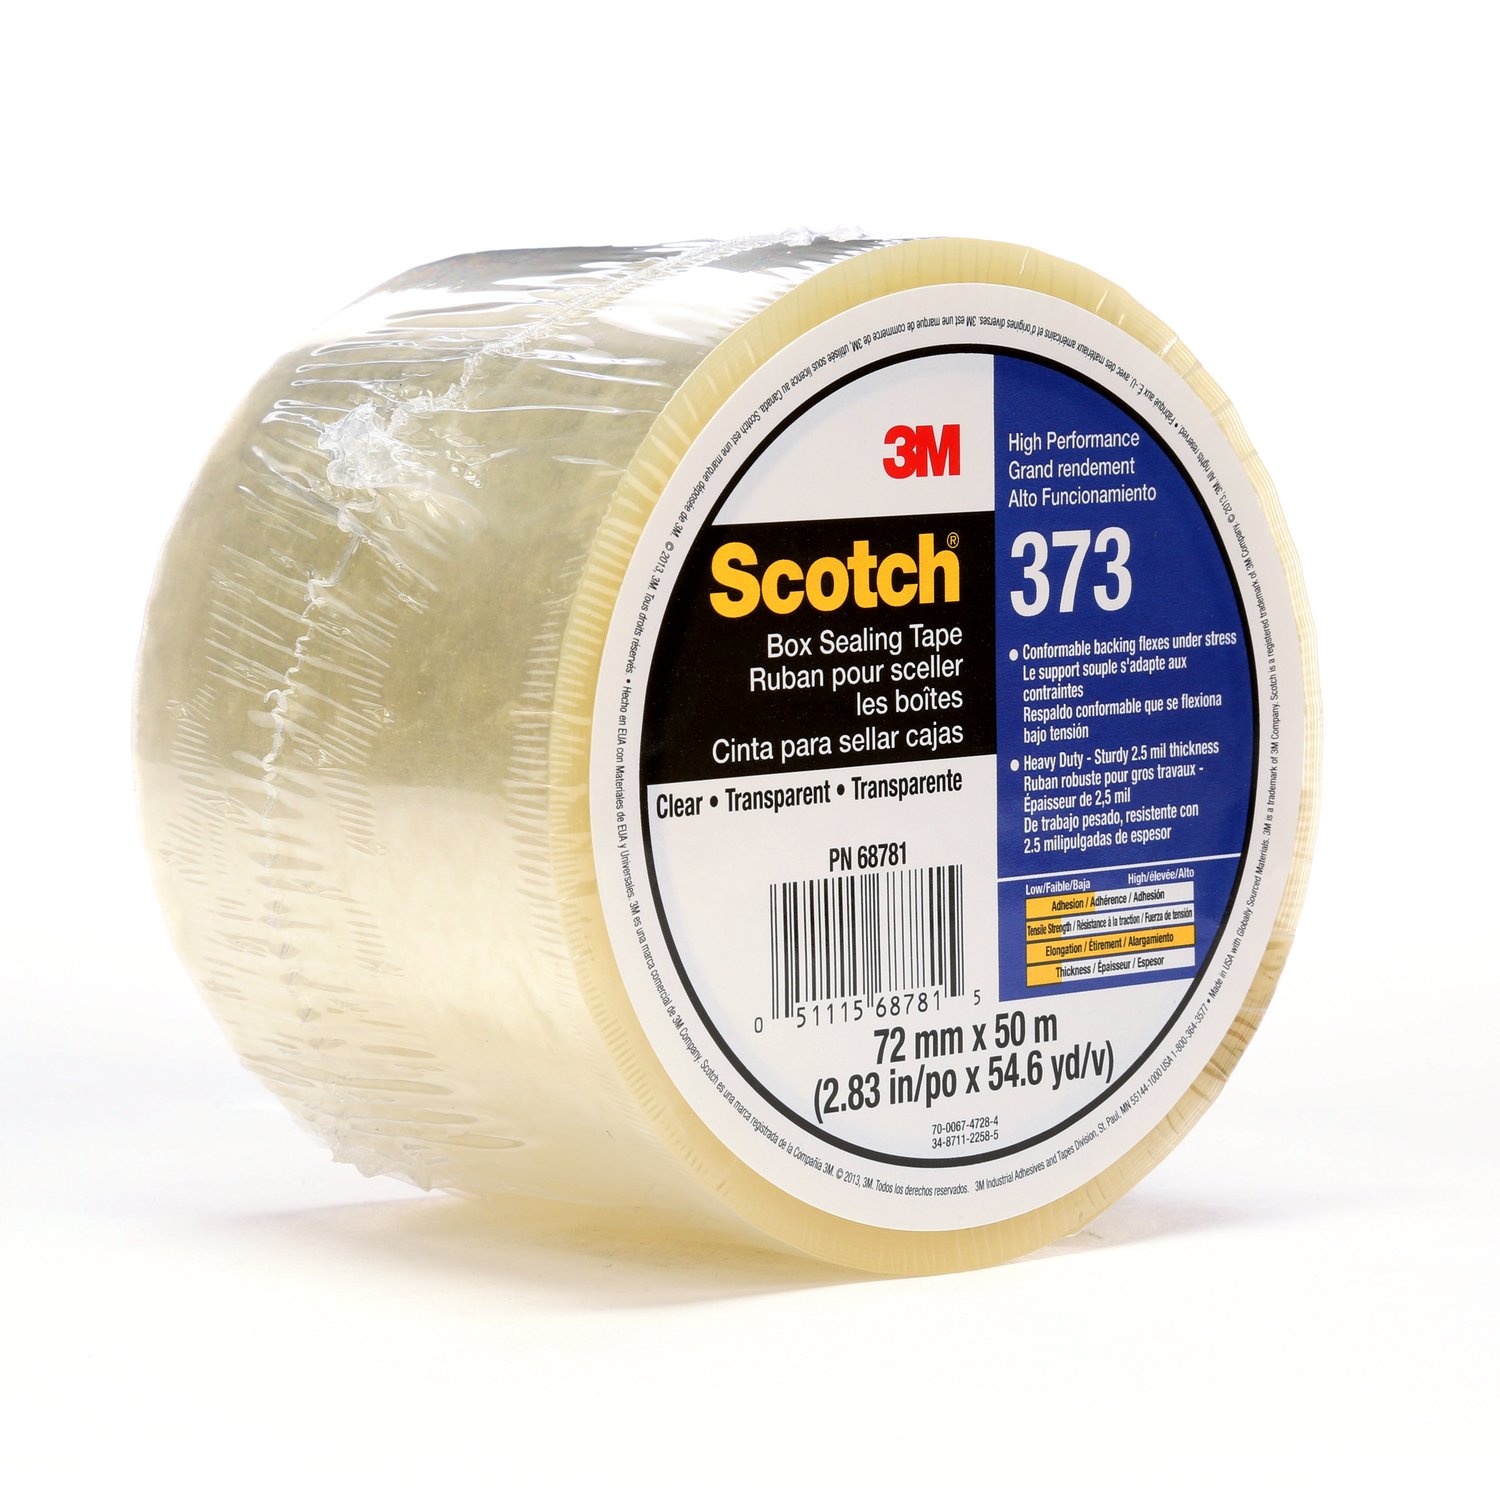 7010312442 - Scotch Box Sealing Tape 373, Clear, 72mm x 50m, 24/Case, Individually
Wrapped Conveniently Packaged